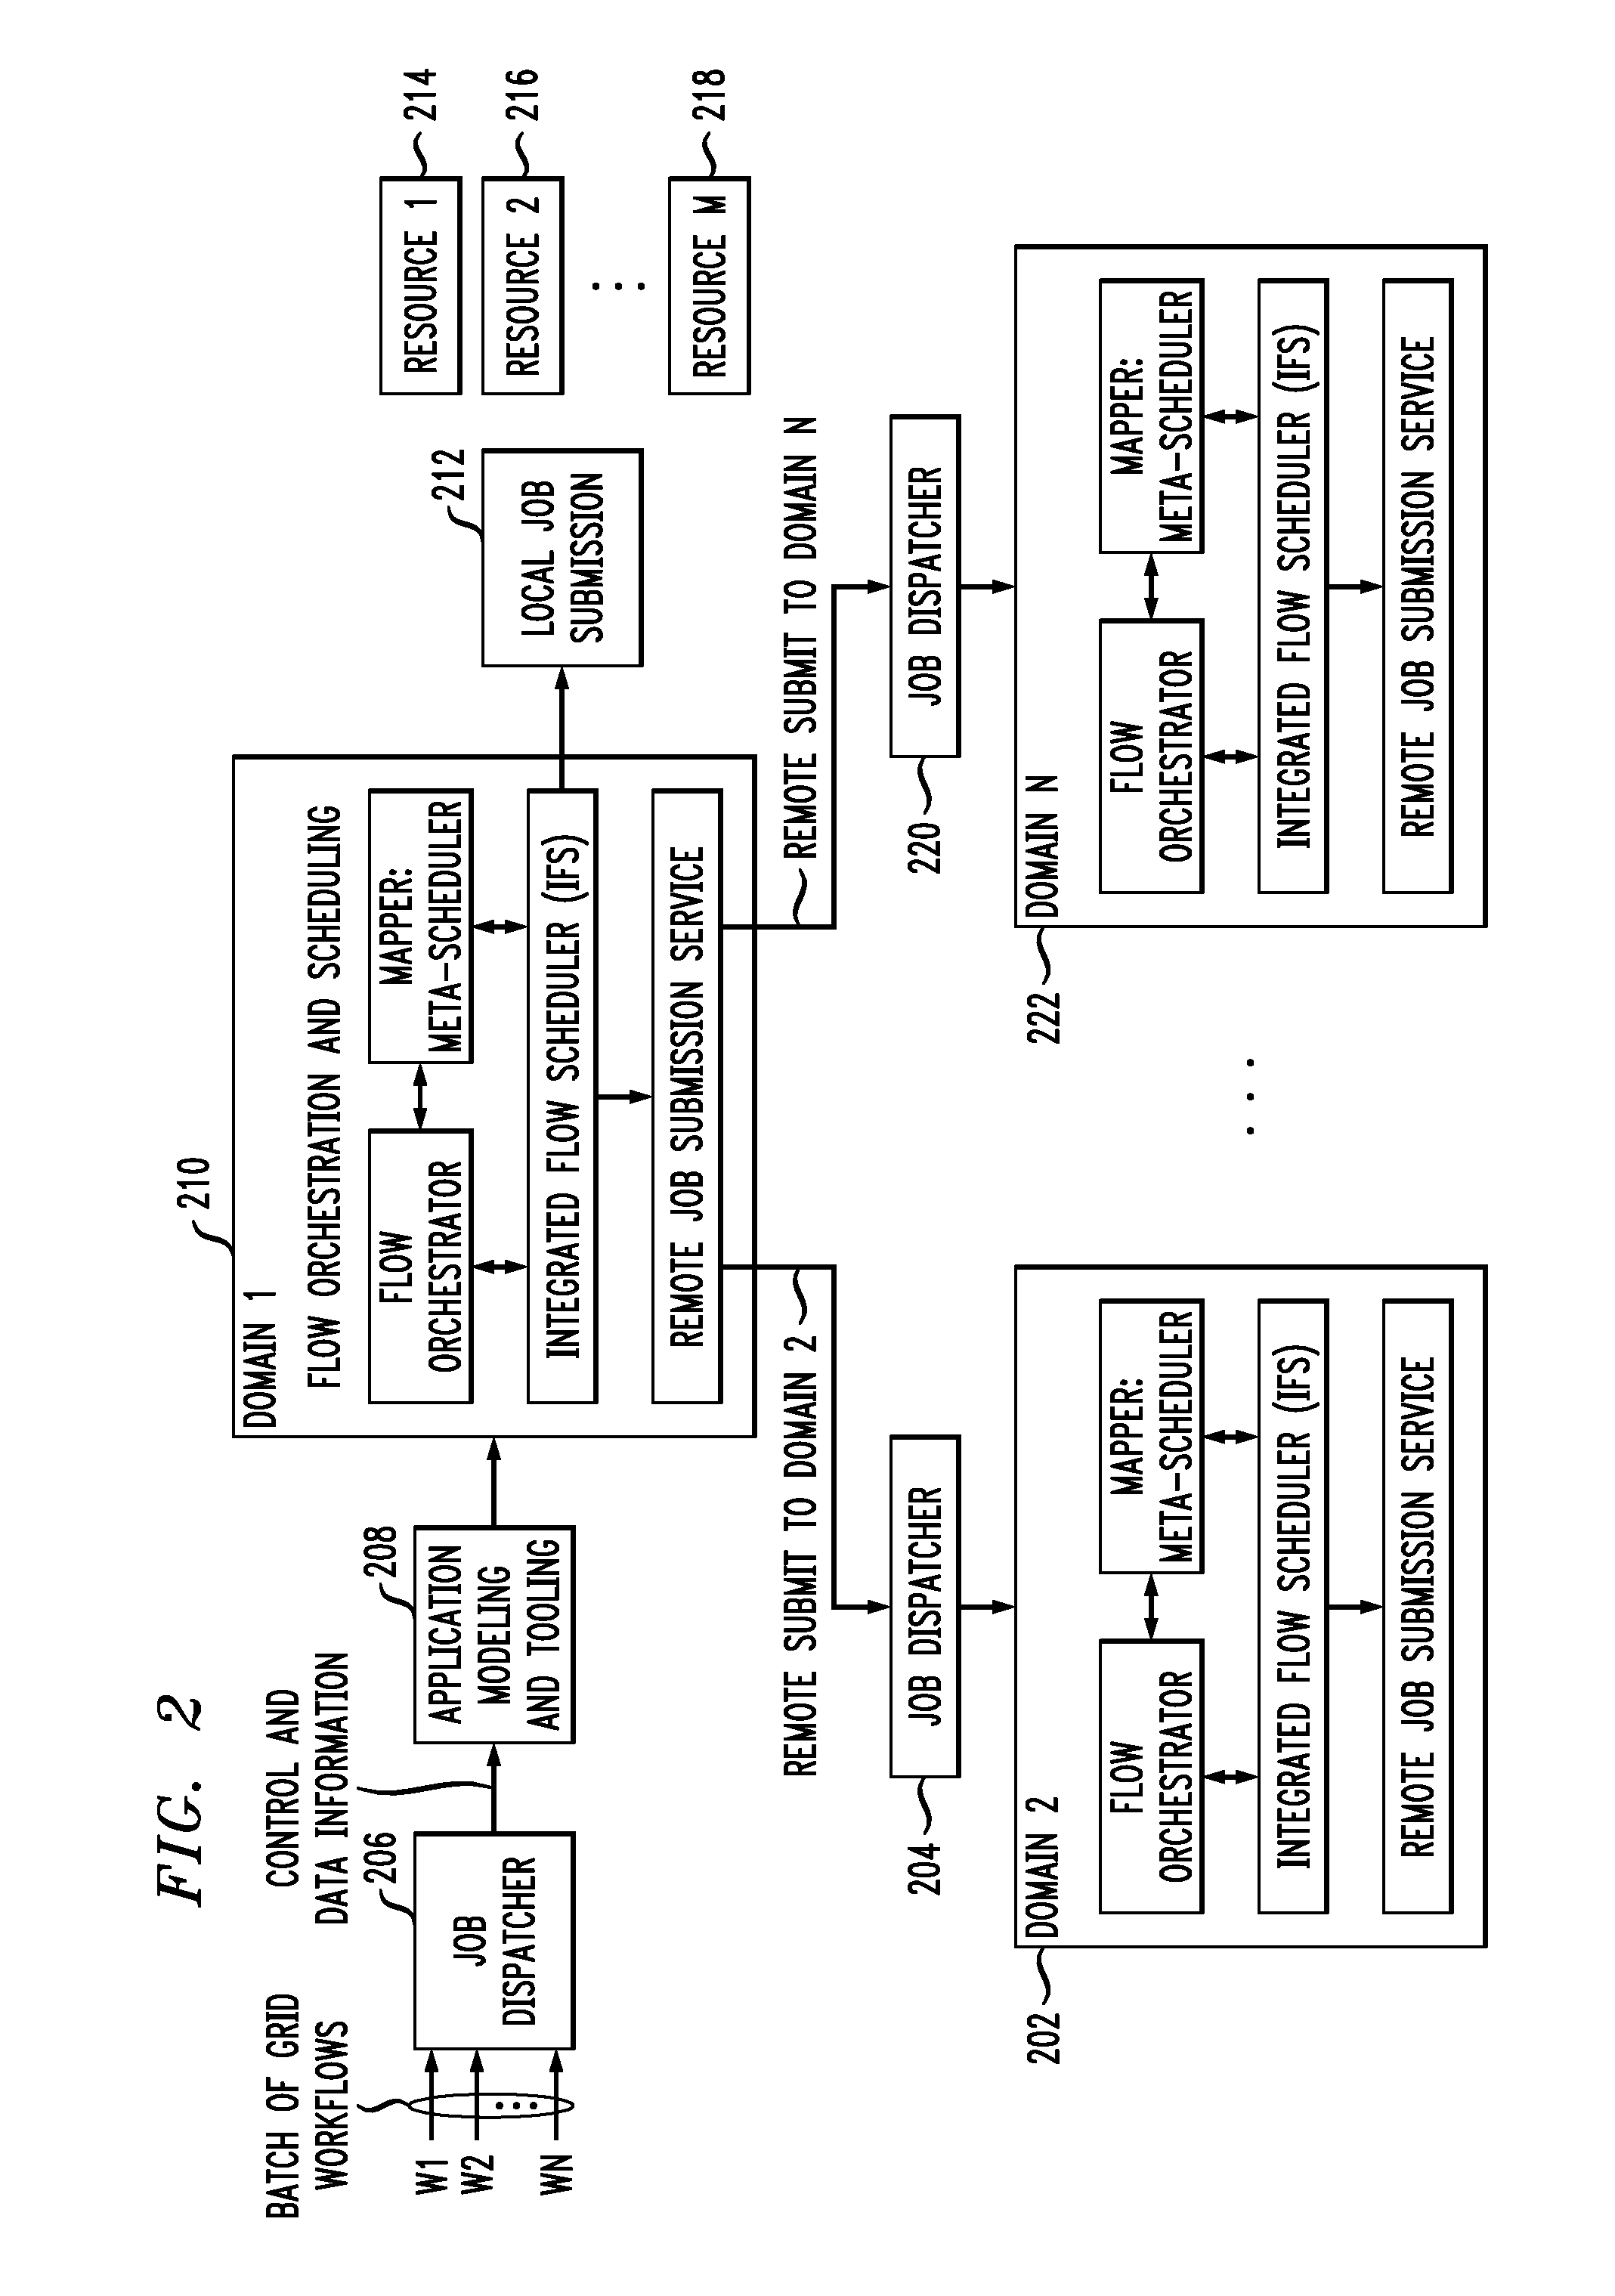 Method for integrating flow orchestration and scheduling for a batch of workflows